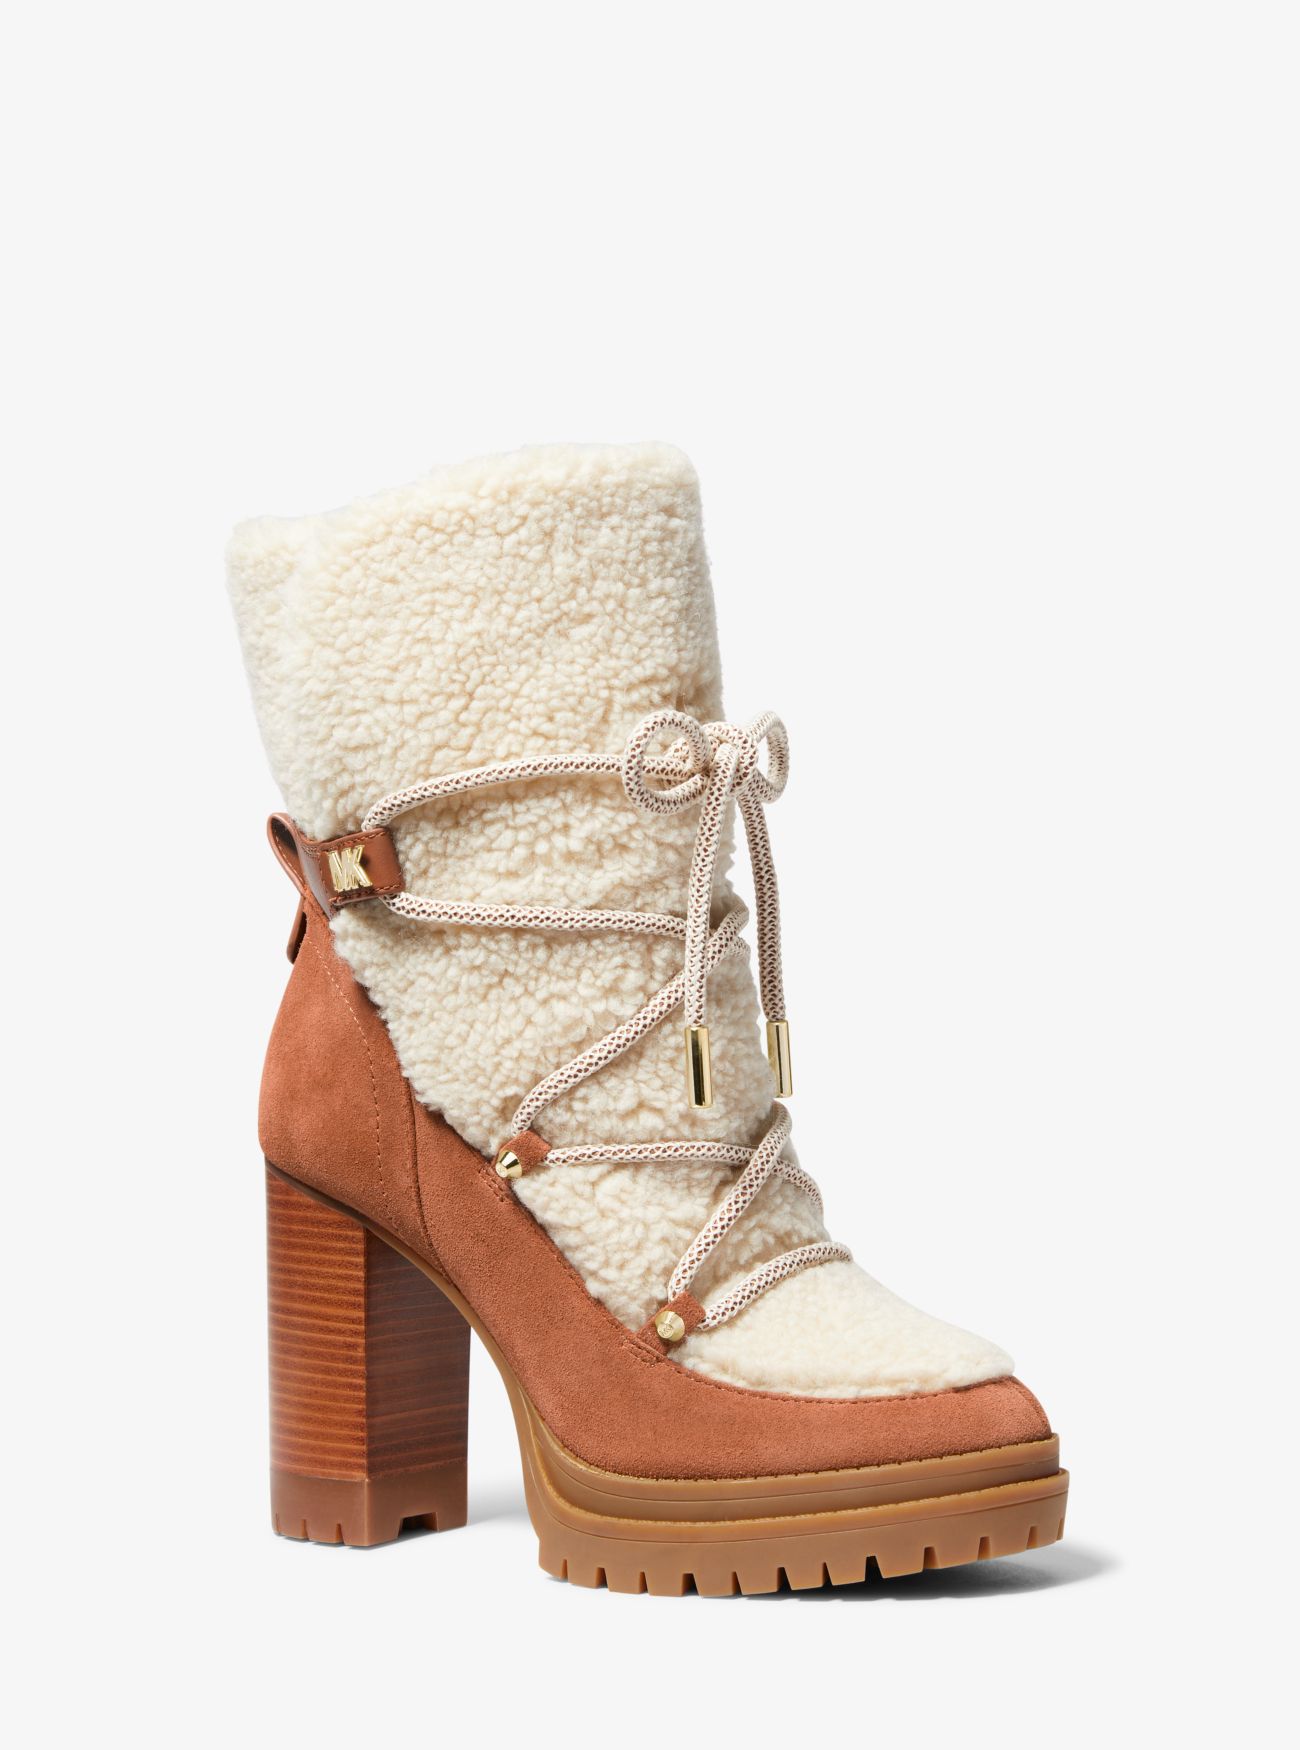 MK Culver Sherpa and Nubuck Lace-Up Boot - Brown - Michael Kors